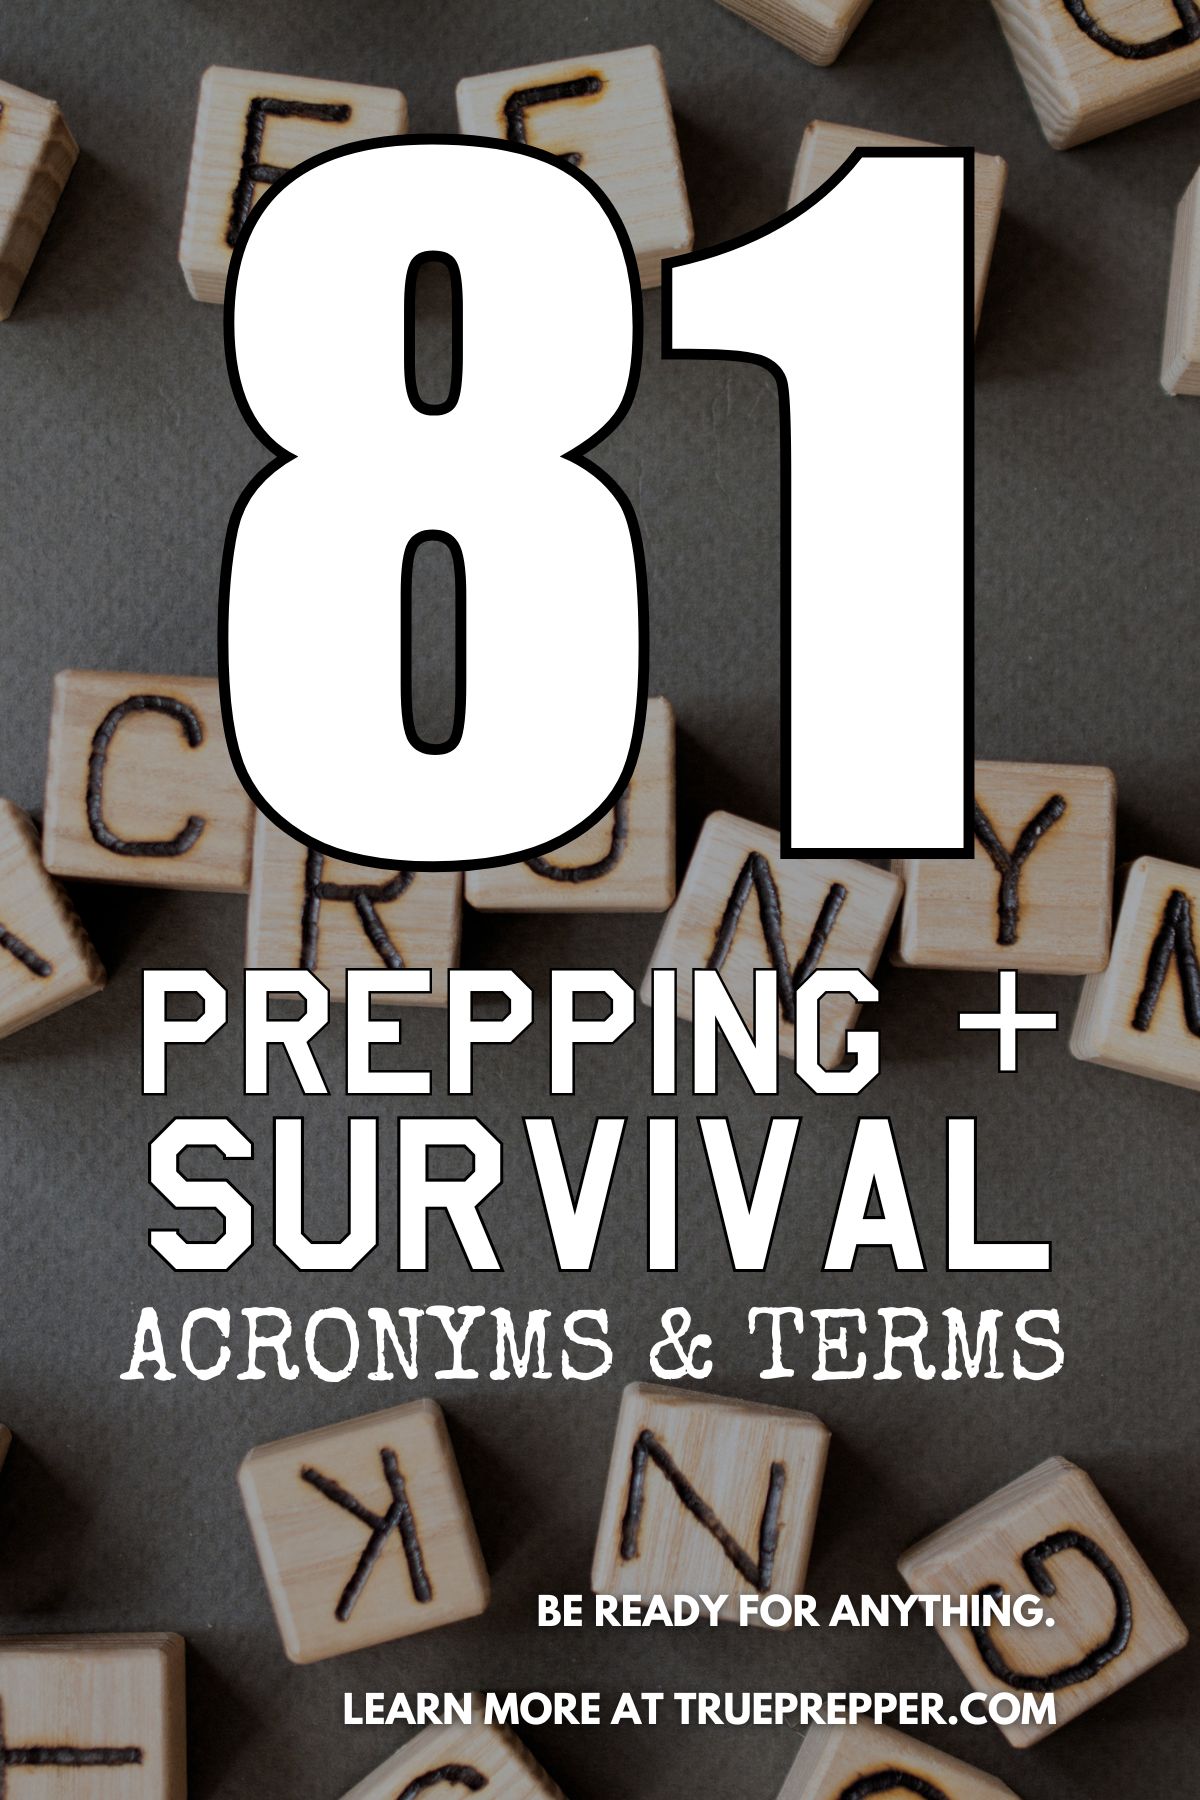 81 Prepping and Survival Acronyms and Terms